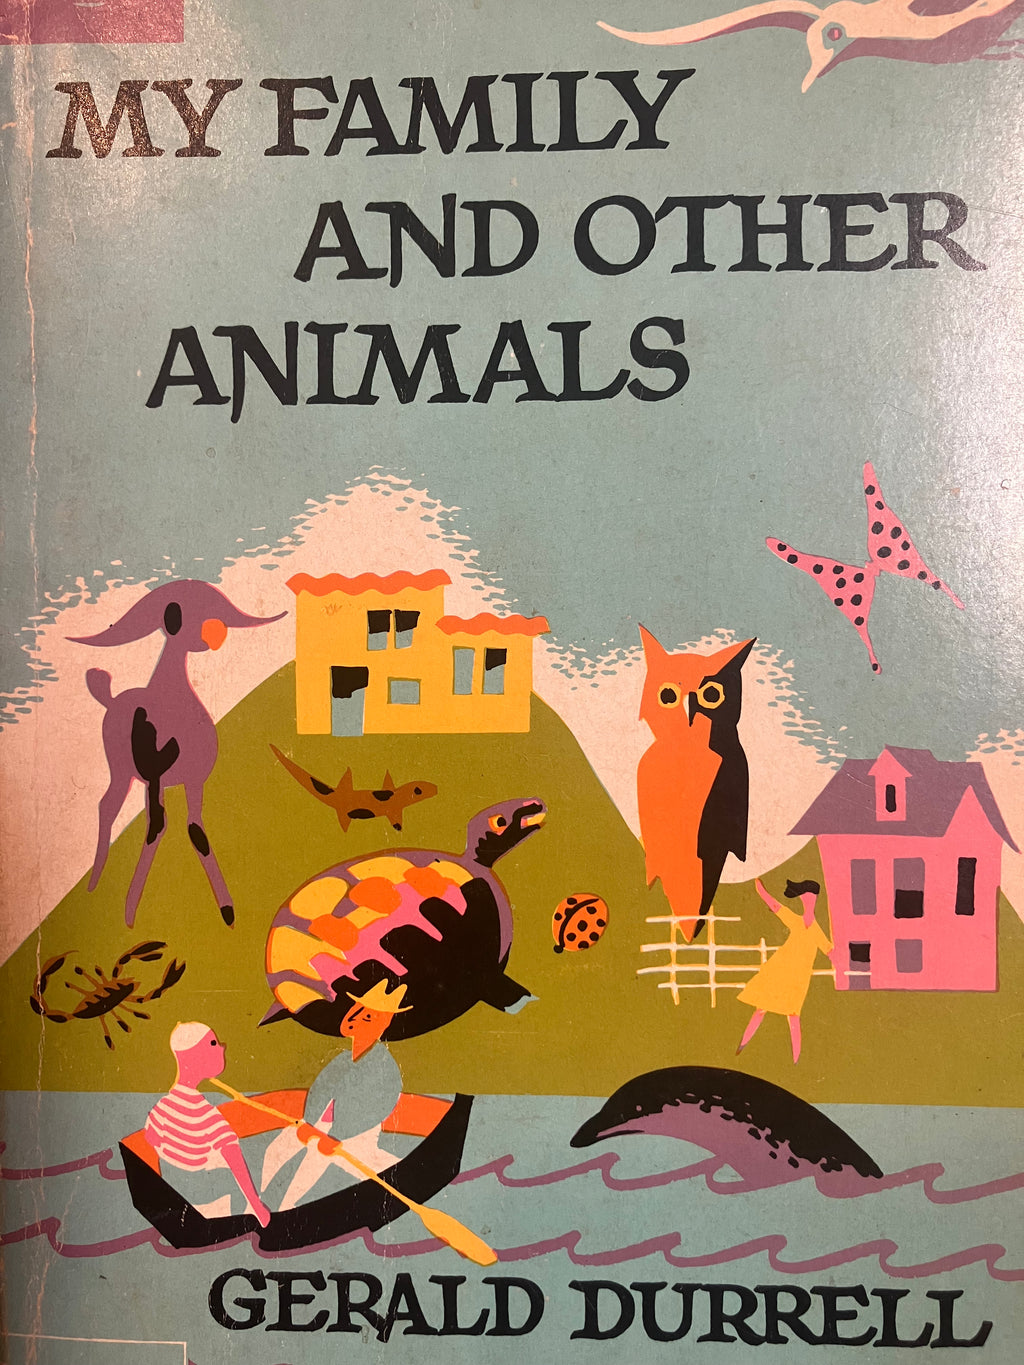 My family and other animals book